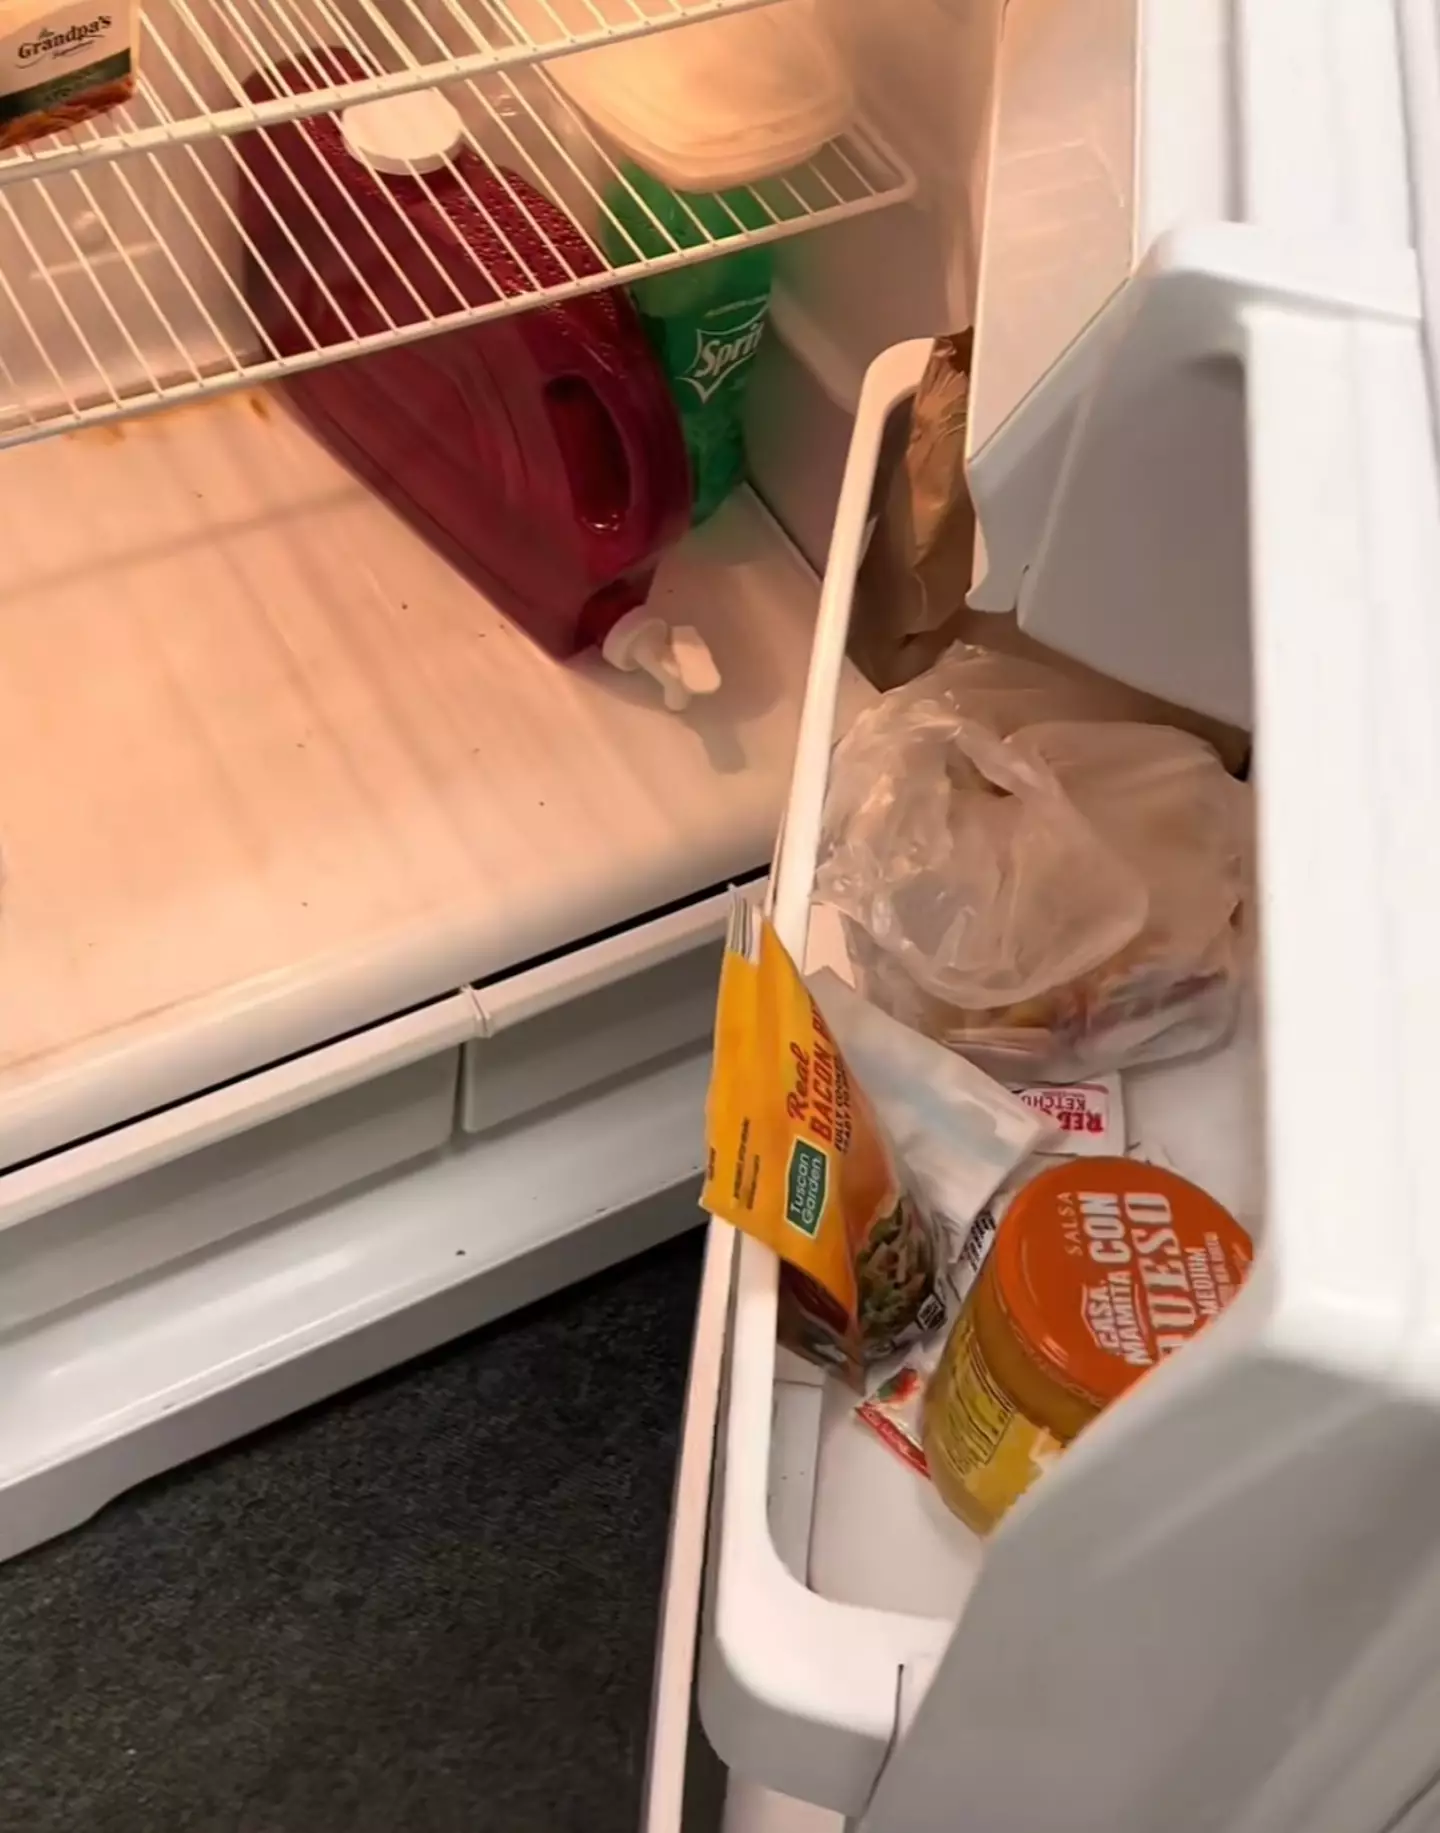 The pair opened up the fridge to find food, snacks and drinks left in there